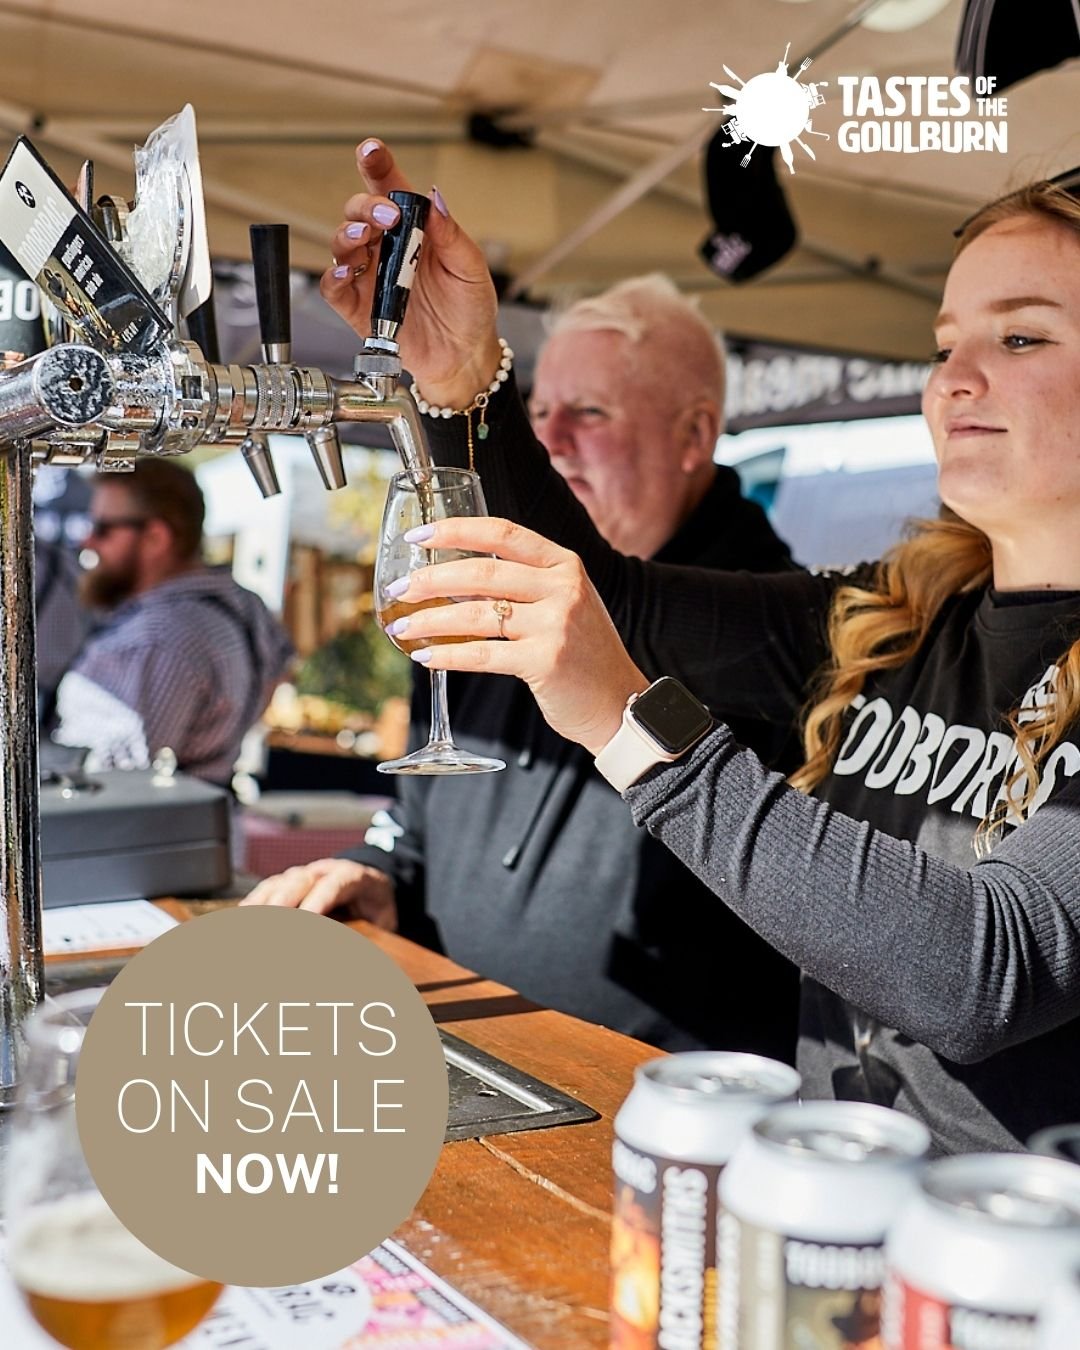 What does a $35 ticket to Tastes of the Goulburn include?

✔️Festival Entry 
✔️FREE Beer + Wine, Cider + Spirit Tastings (you keep your glass 🤩) 
✔️Live Music
✔️Cooking Demonstrations
✔️Local ready to eat food vendors
✔️Local producers &amp; so much